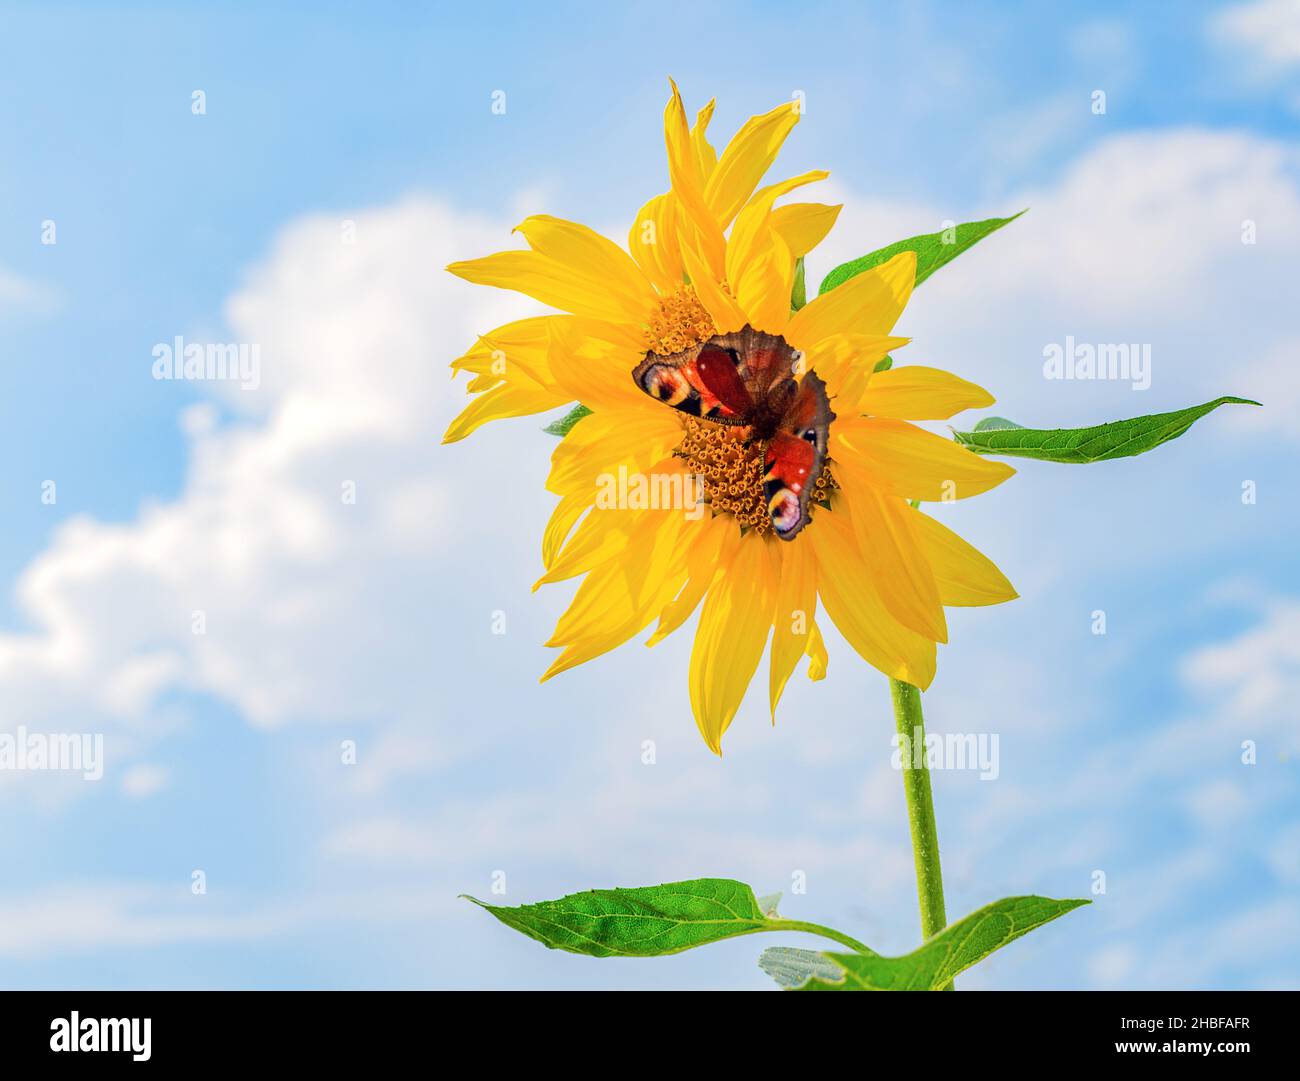 Bright yellow sunflower with a butterfly on a background of blue sky, on a summer day Stock Photo